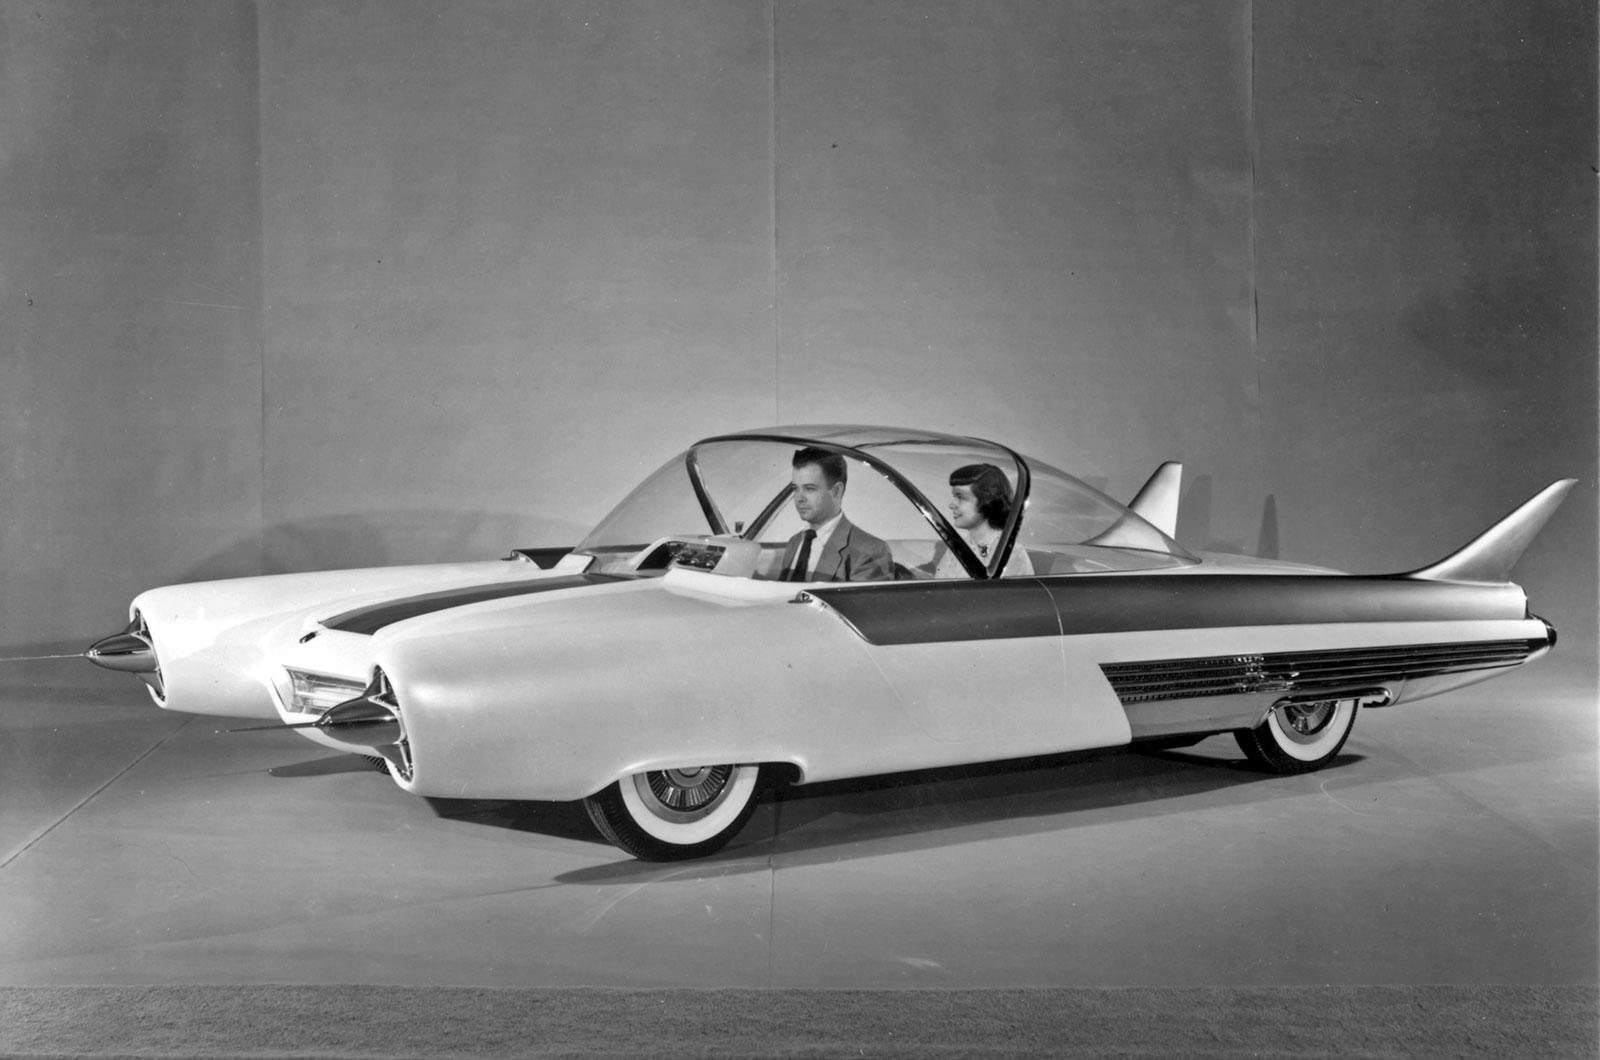 <p>The FX stood for Future Experimental, those spears on the front were aerials to help control the car to stop it running into vehicles in front, and the ‘Atmos’ was taken from atmosphere, which Ford said “came from free and unlimited creative thinking”. With a glass canopy, seating for three and a pair of aircraft-style fins, this was truly a jet-age design.</p>